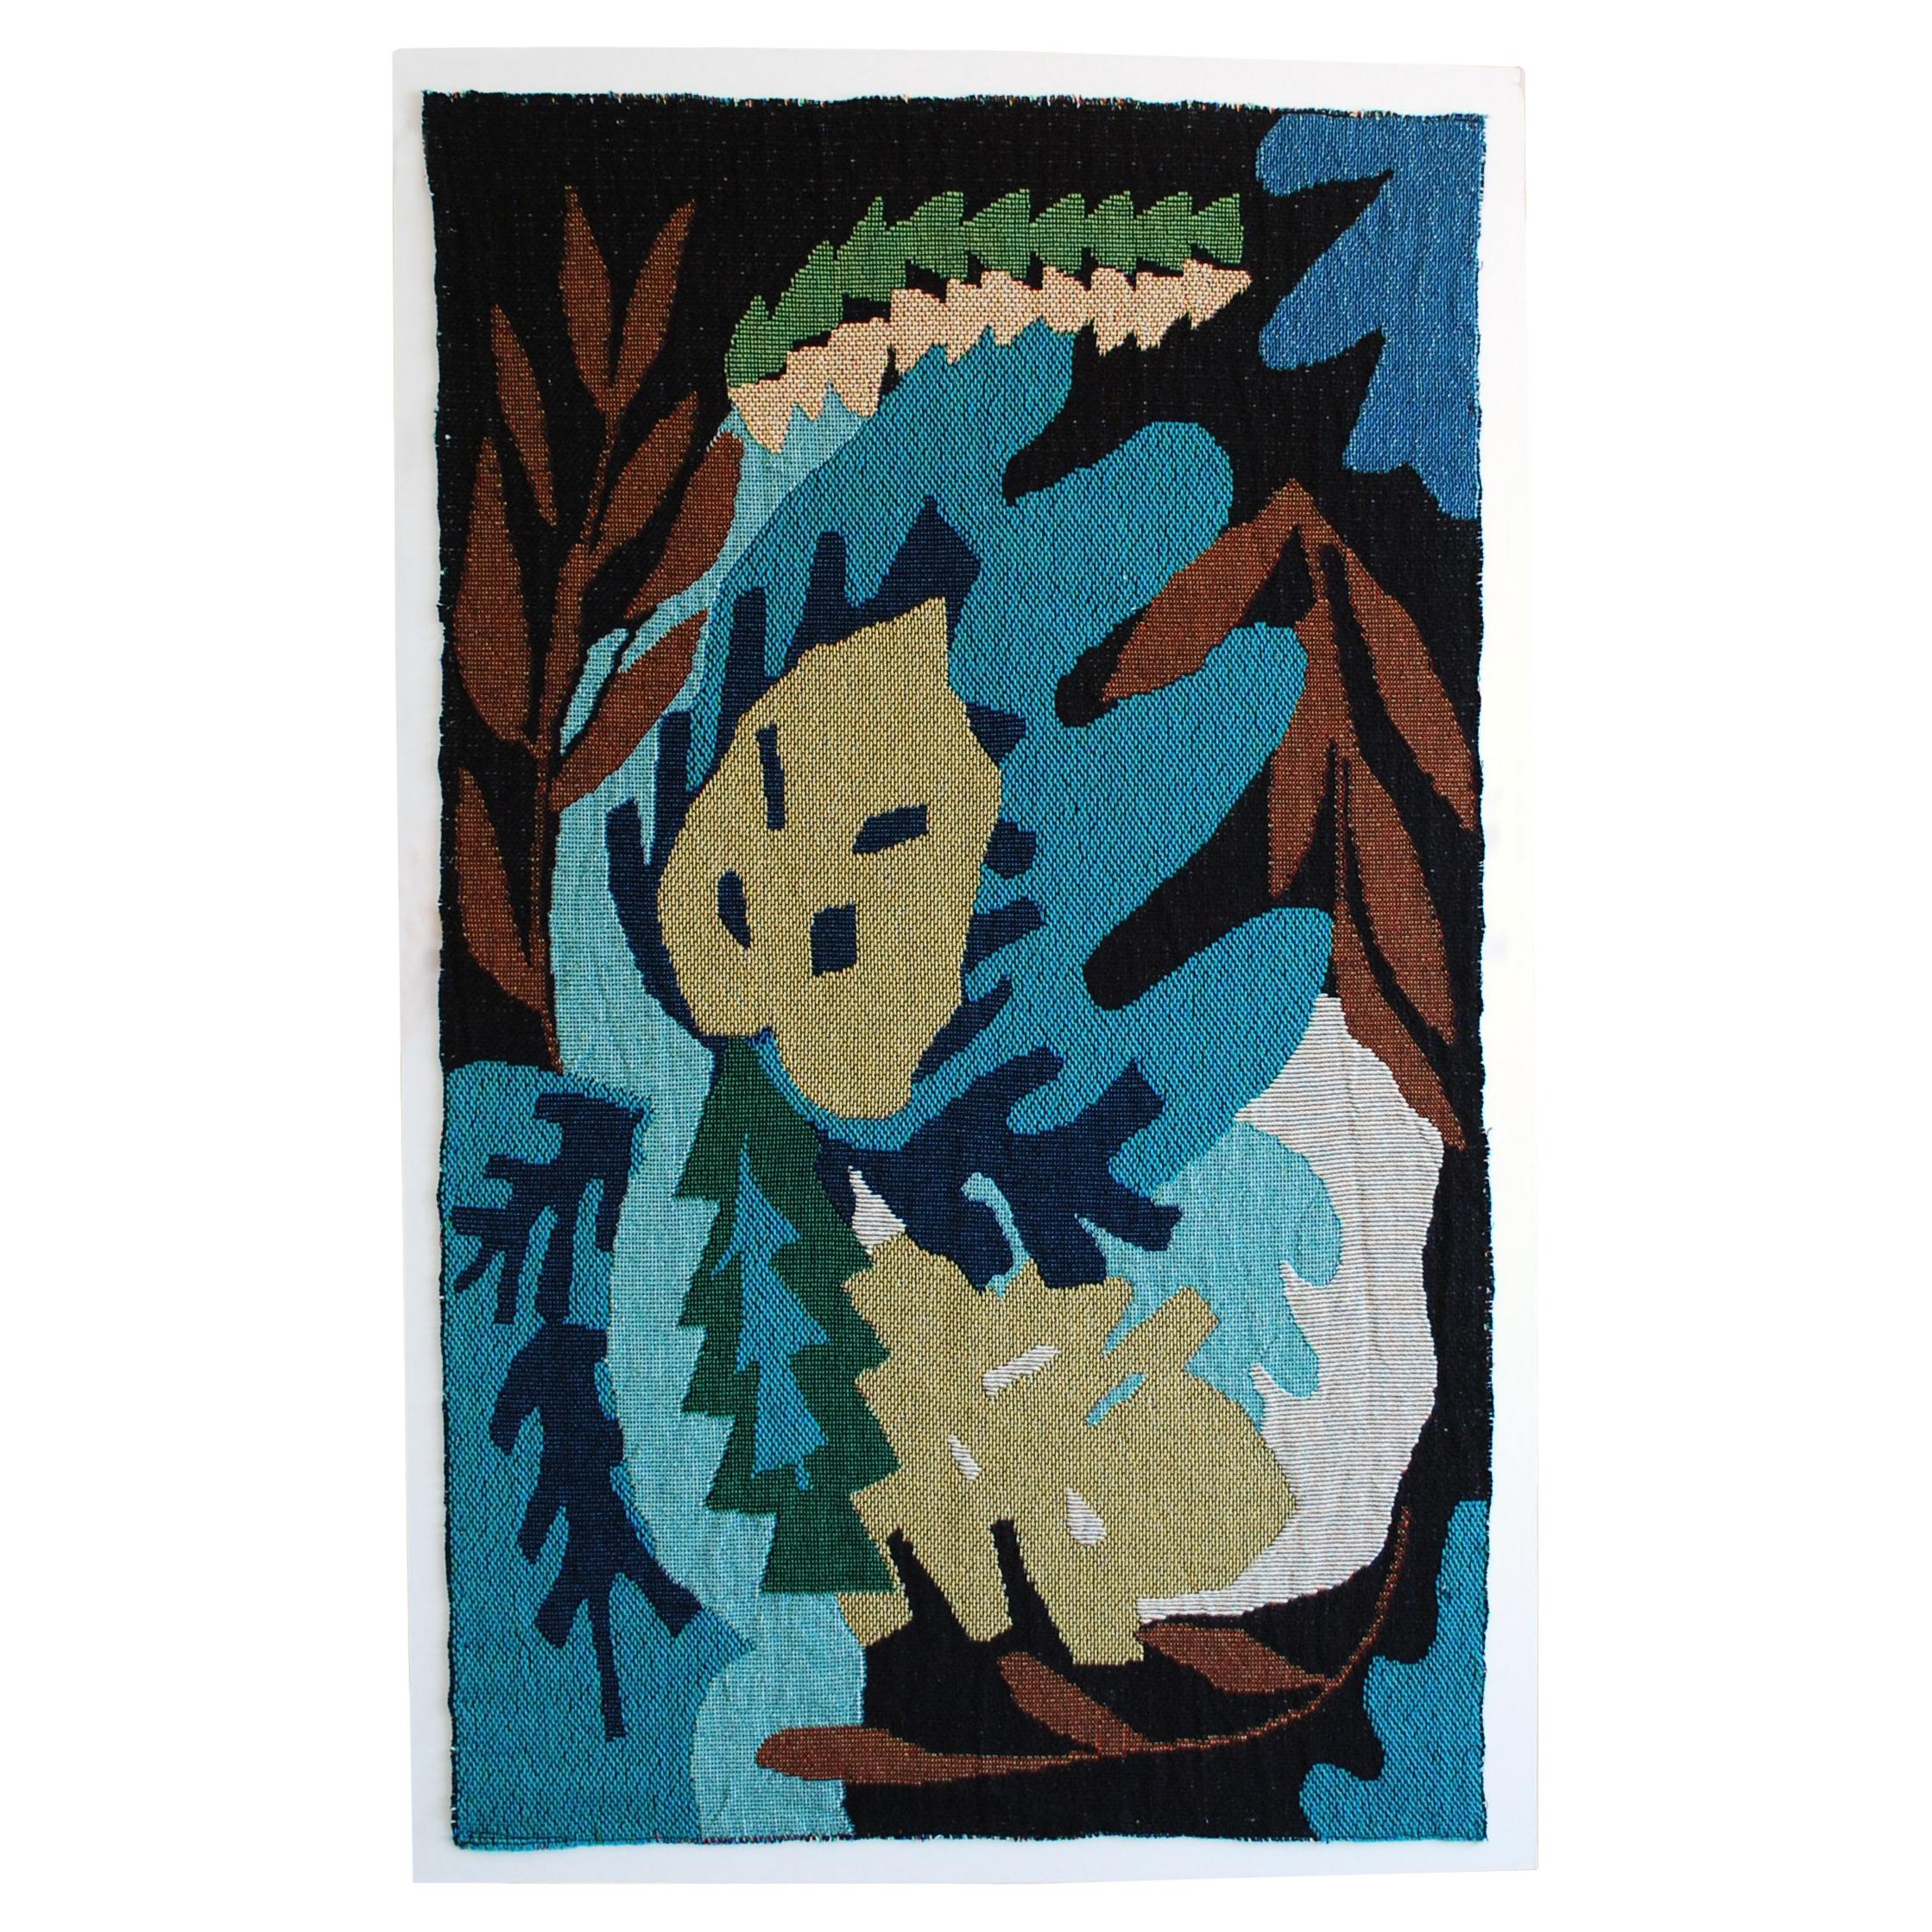 Leaf Study II Woven Tapestry Wall Hanging Artwork